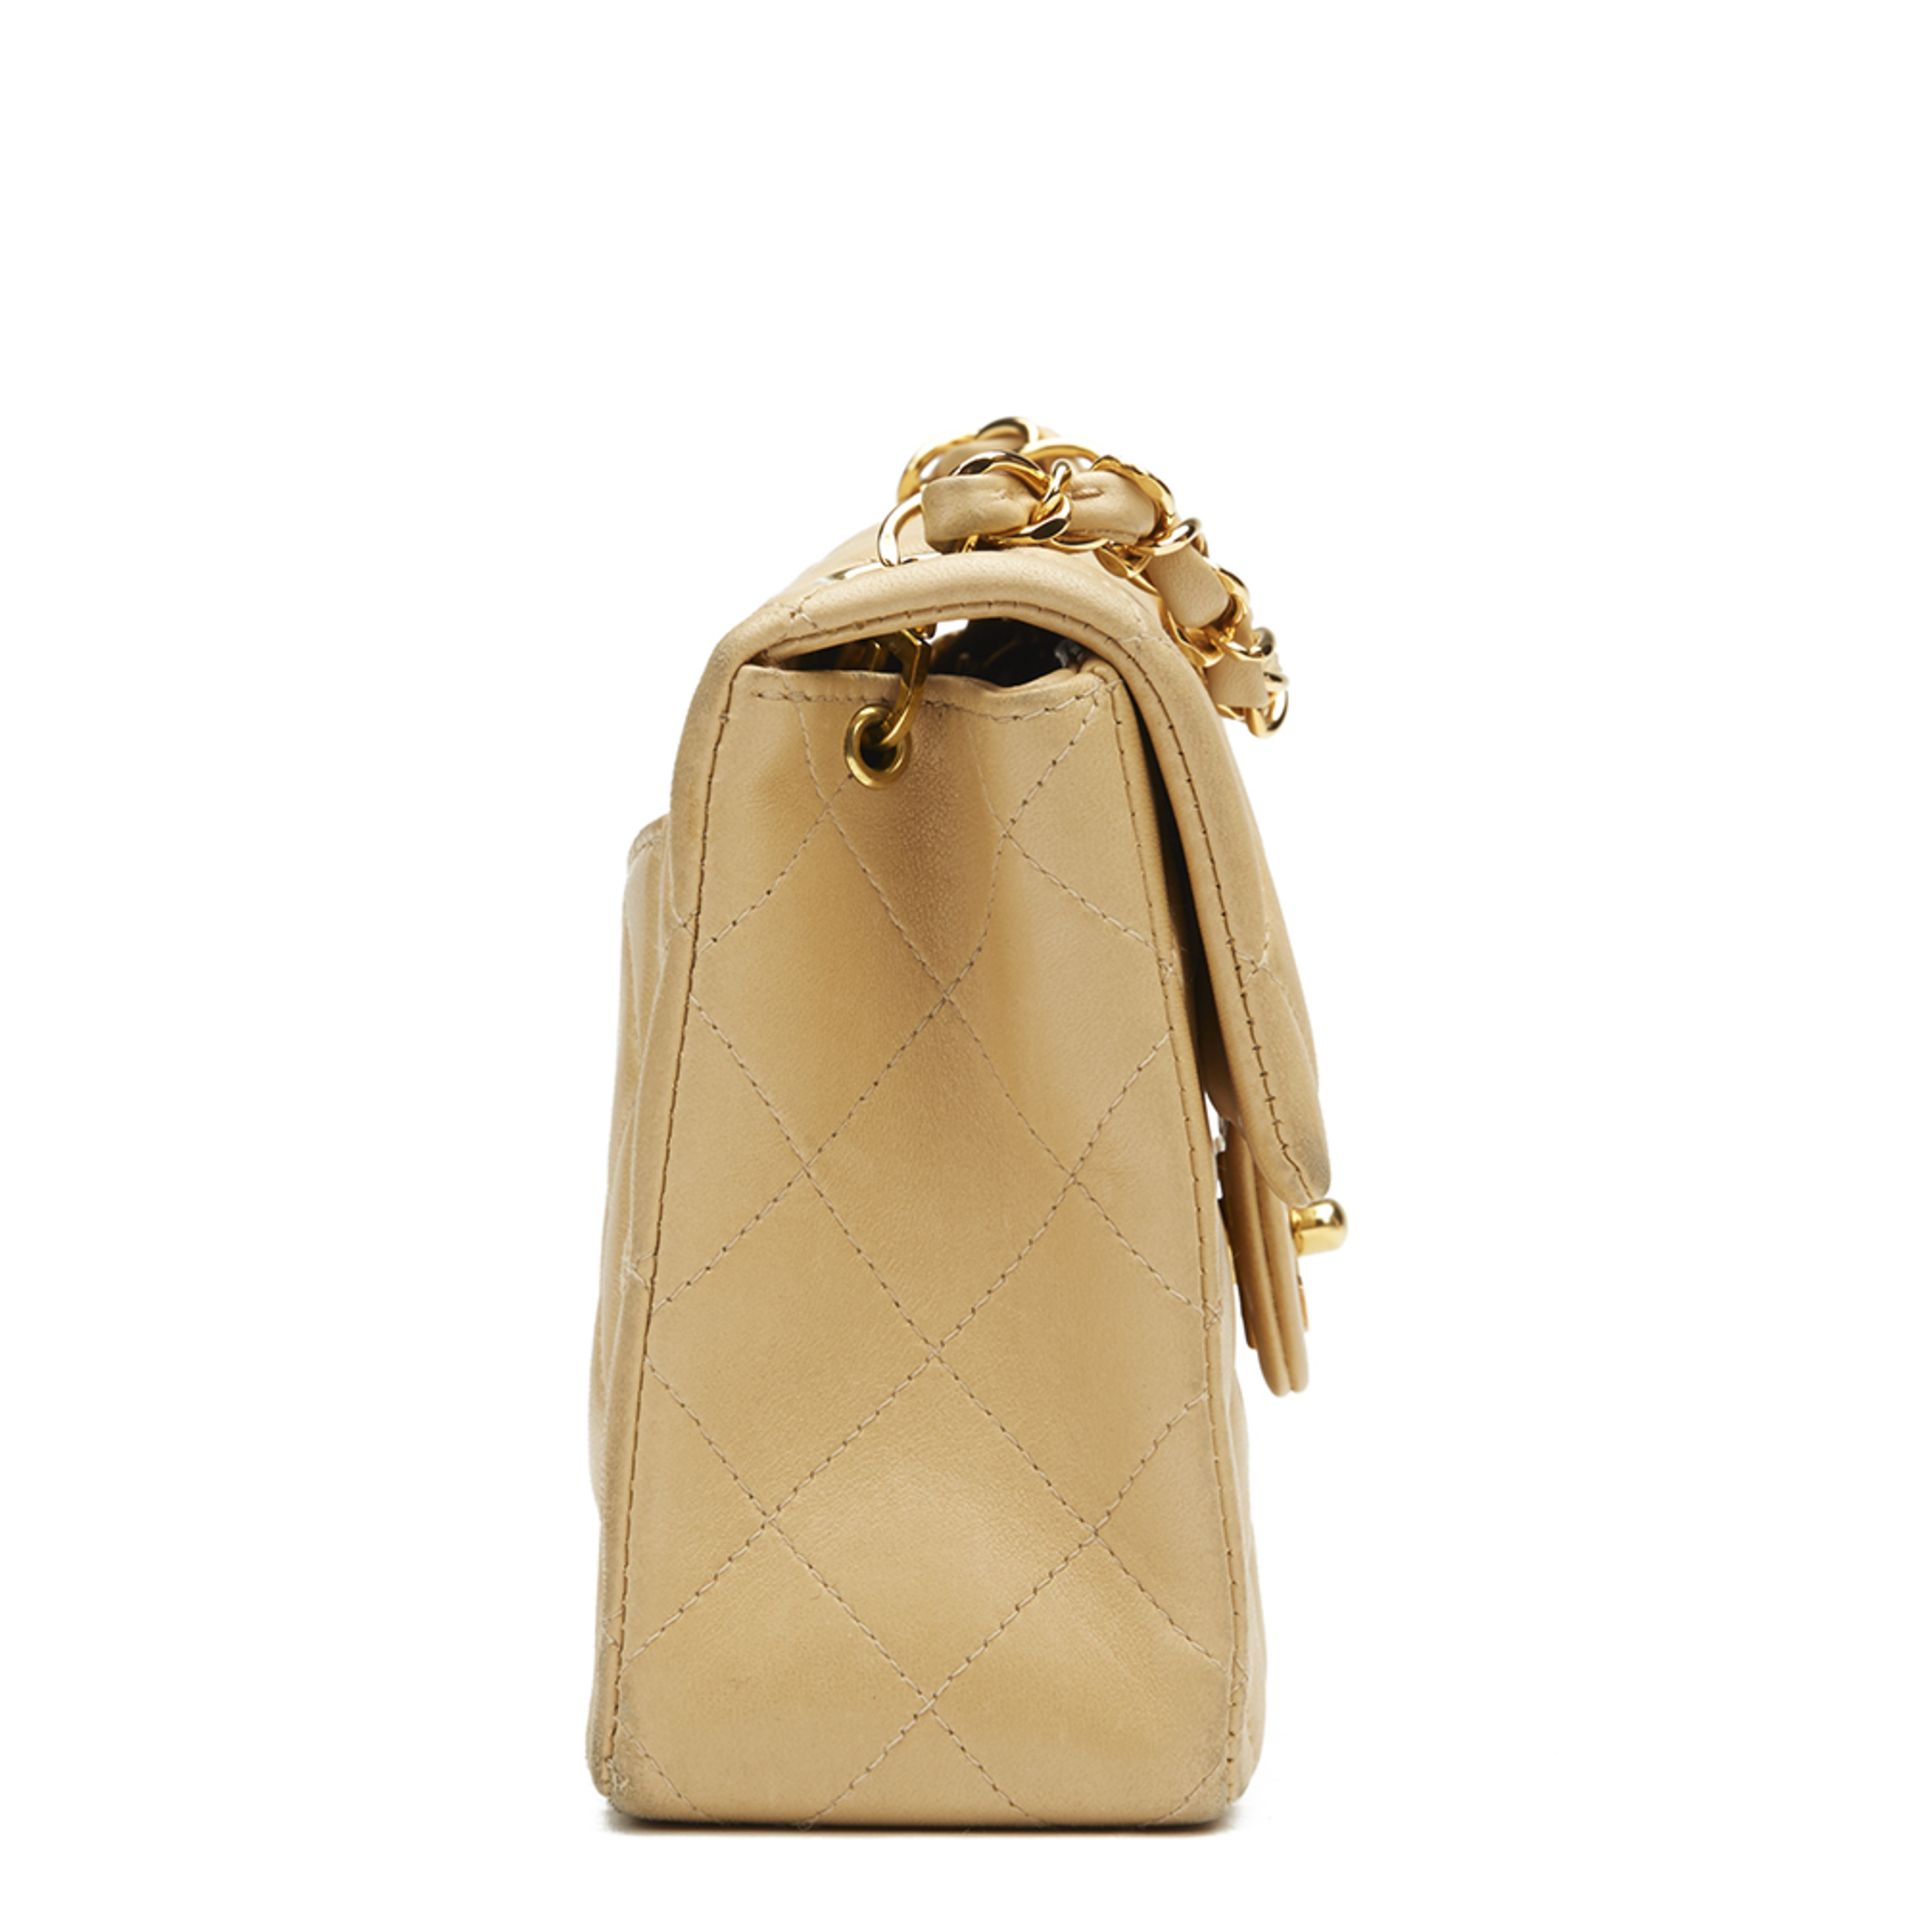 Chanel Beige Quilted Lambskin Vintage Mini Flap Bag - Image 5 of 13